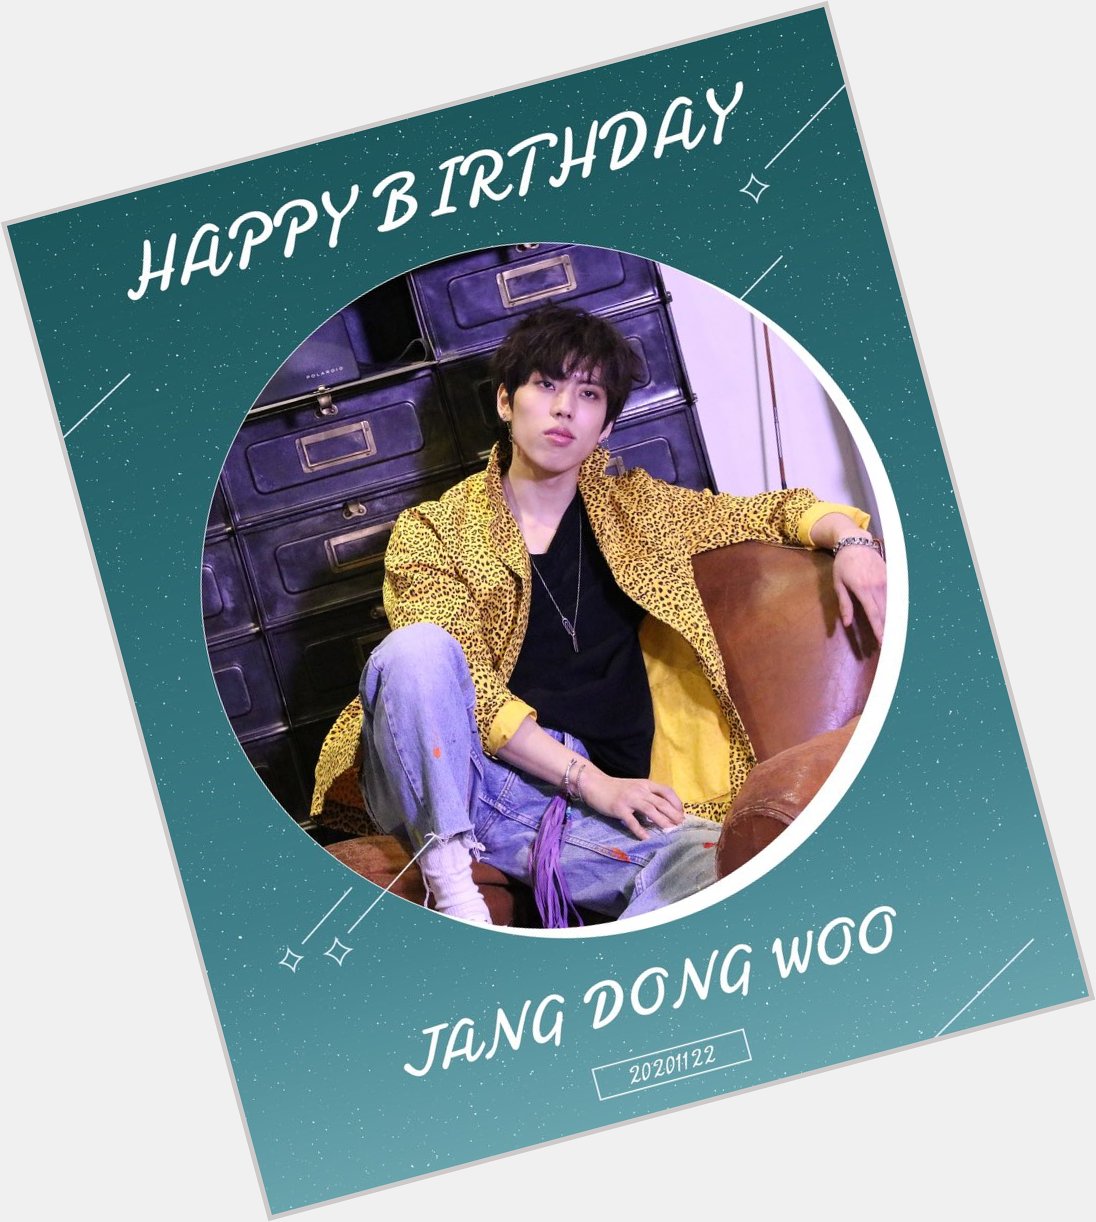 Happy birthday to our sunshine jang dong woo! We love you      